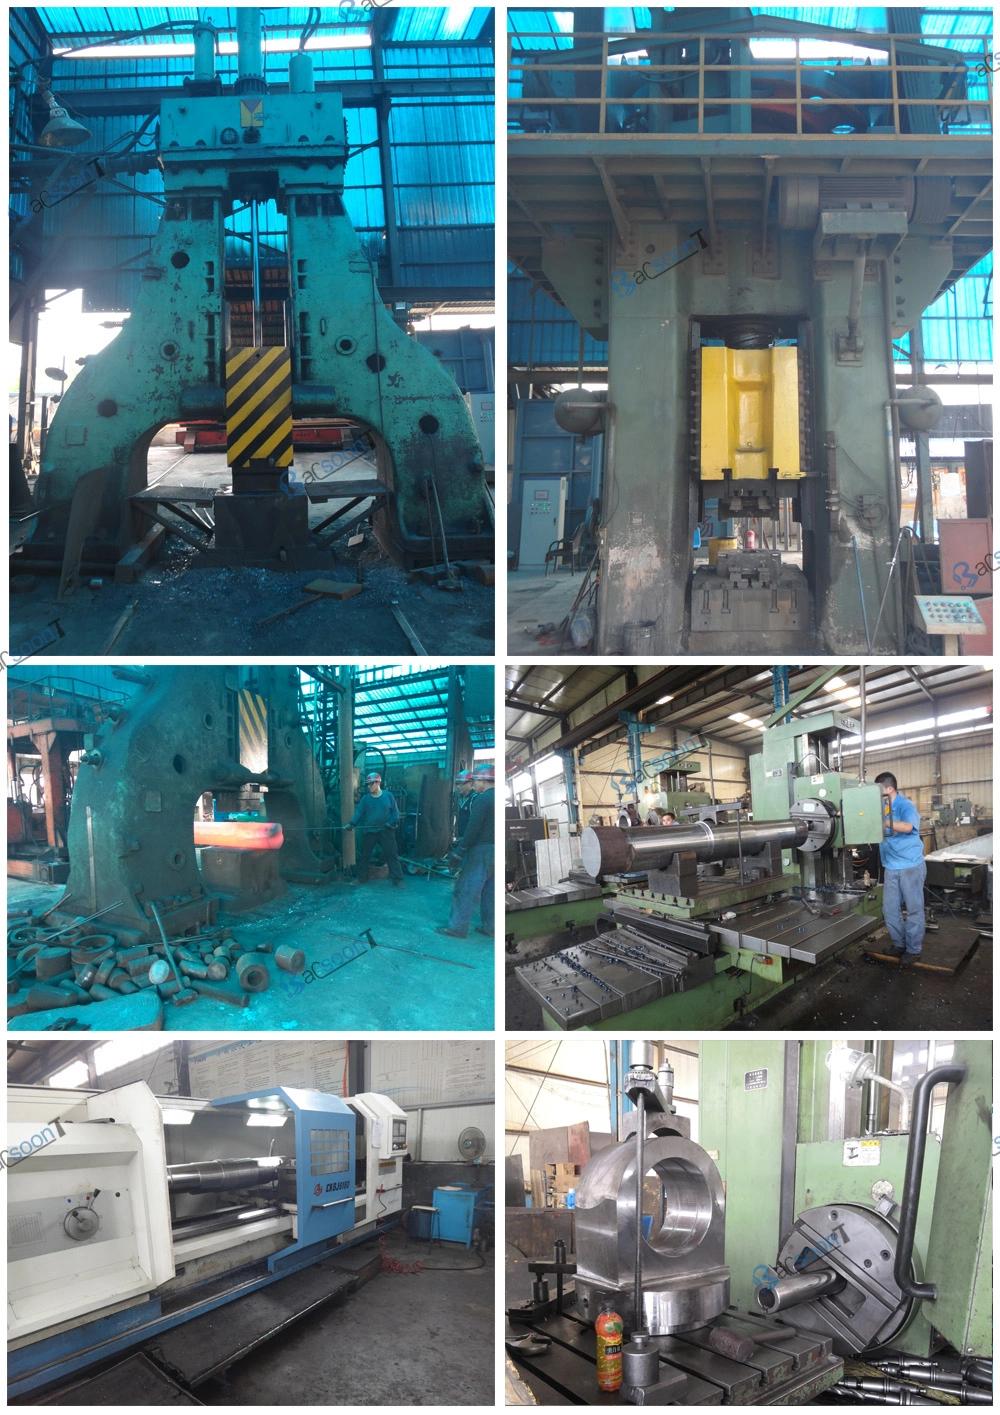 Customized Forged Steel Part for Oil Industry with TUV Certification